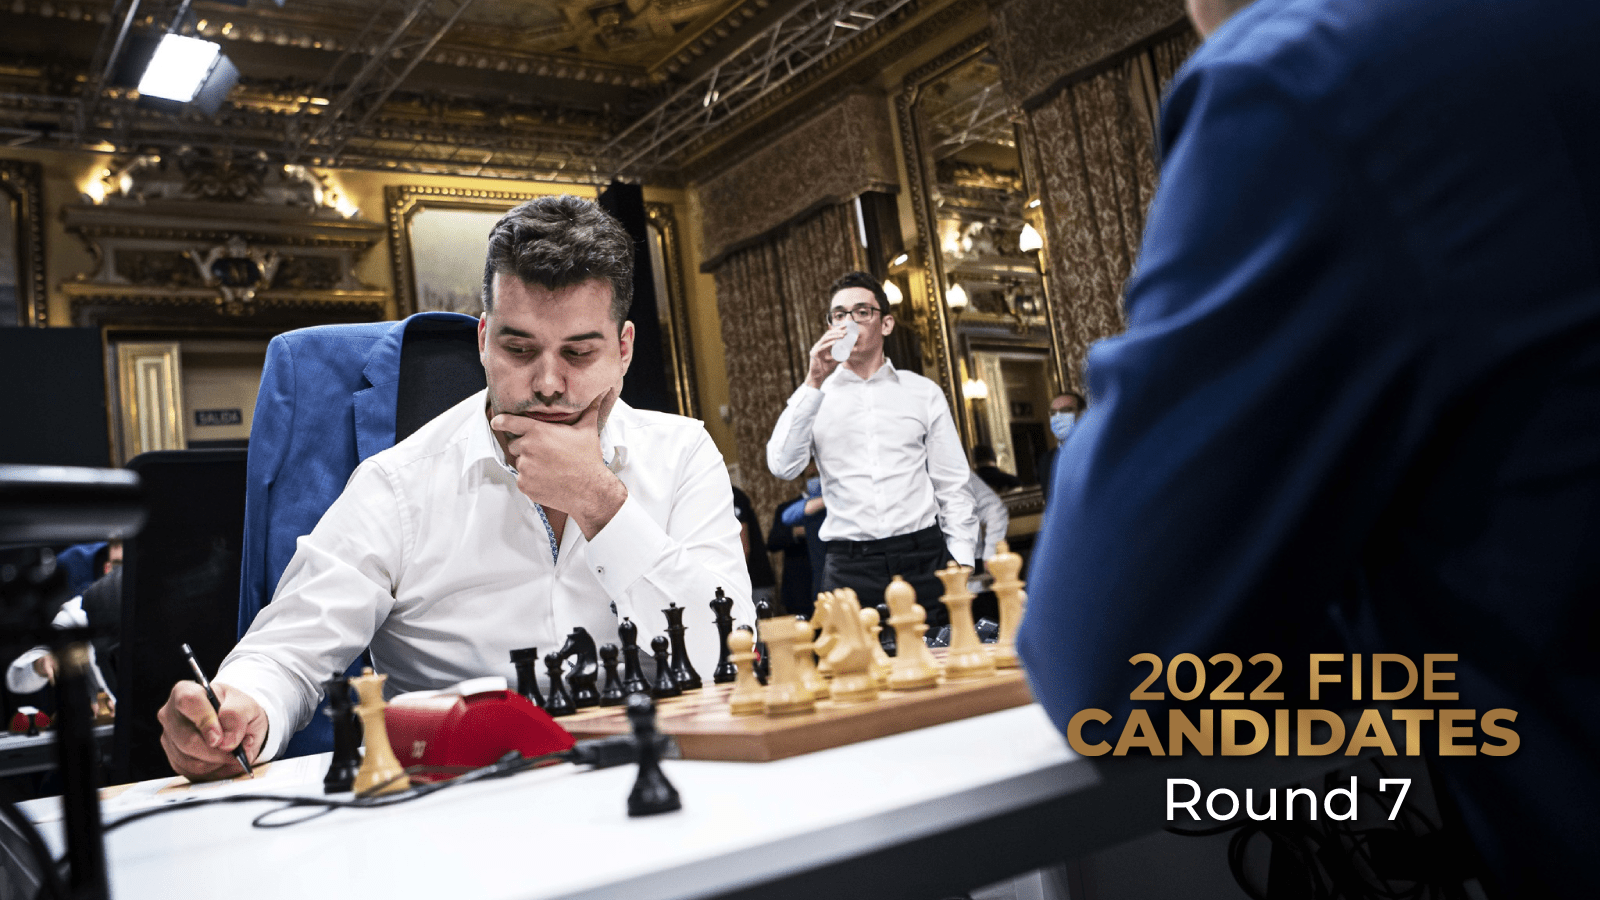 Official Chess Pieces for the Candidates Tournament 2022